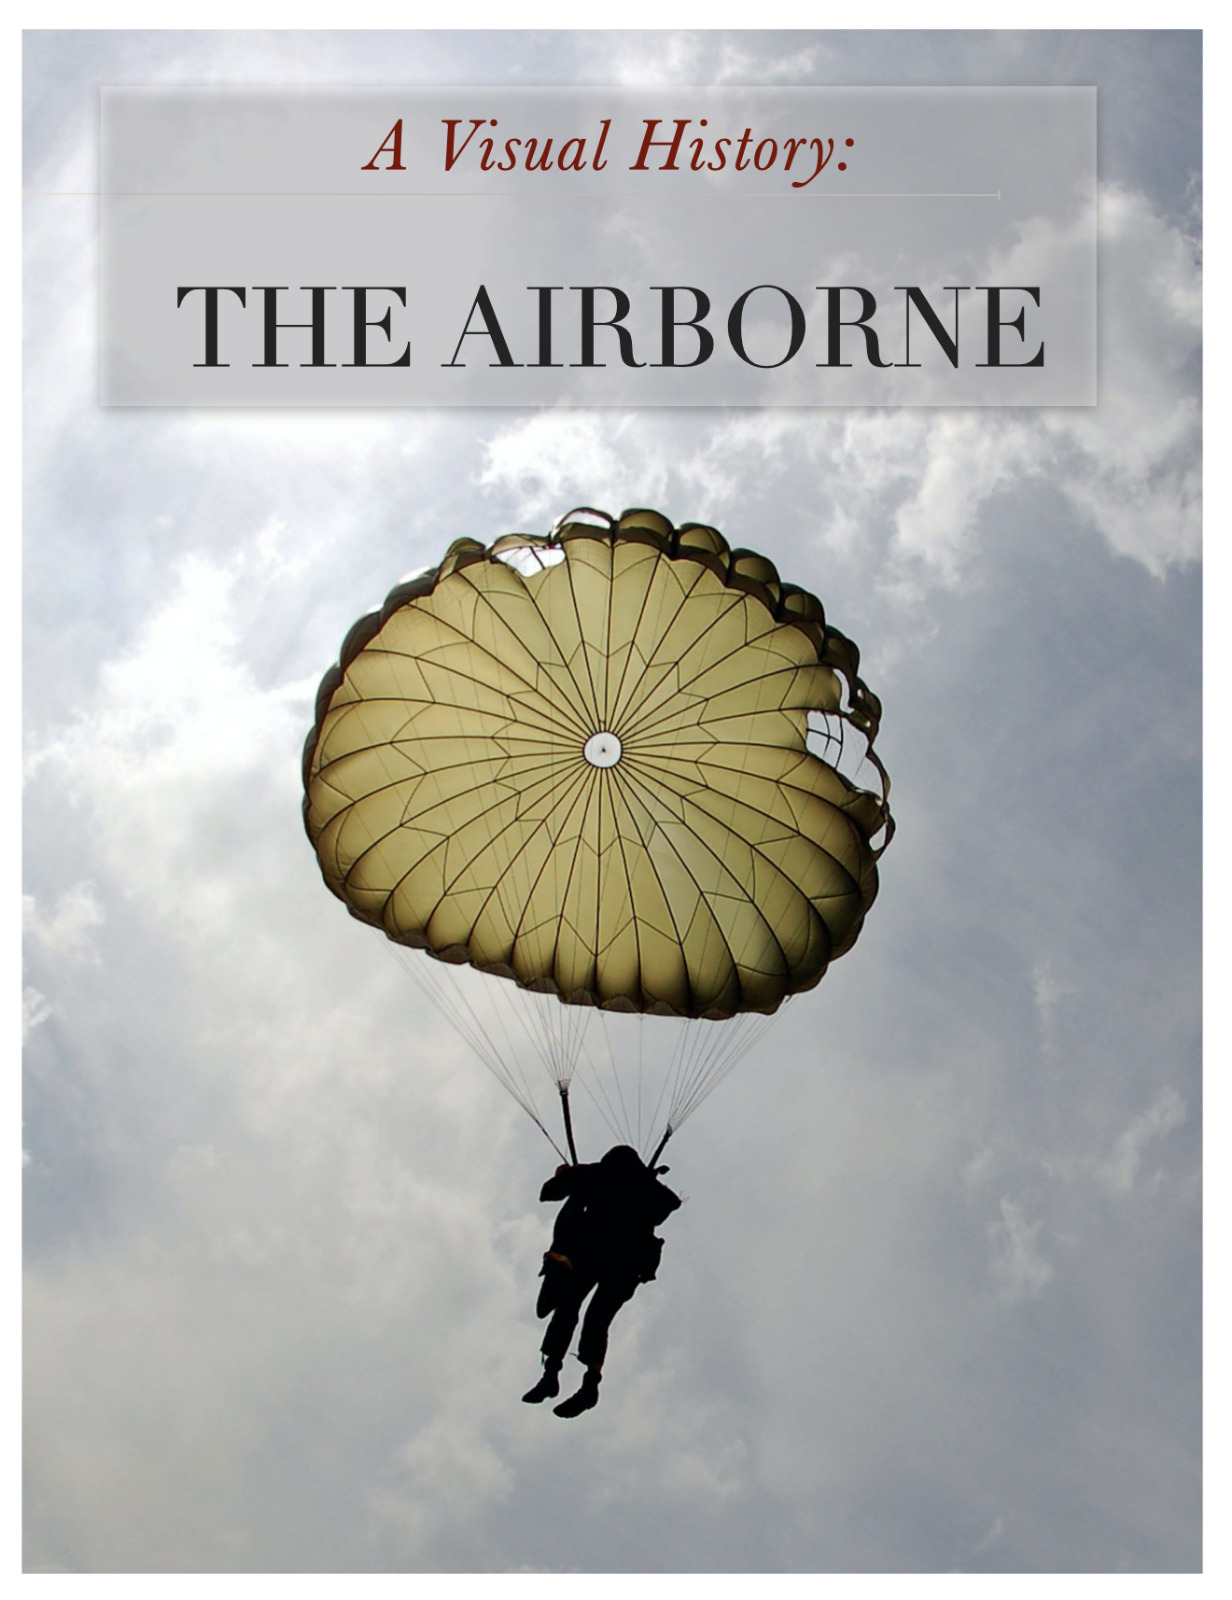 247 Page THE AIRBORNE: A VISUAL HISTORY Parachute School Book on Data CD